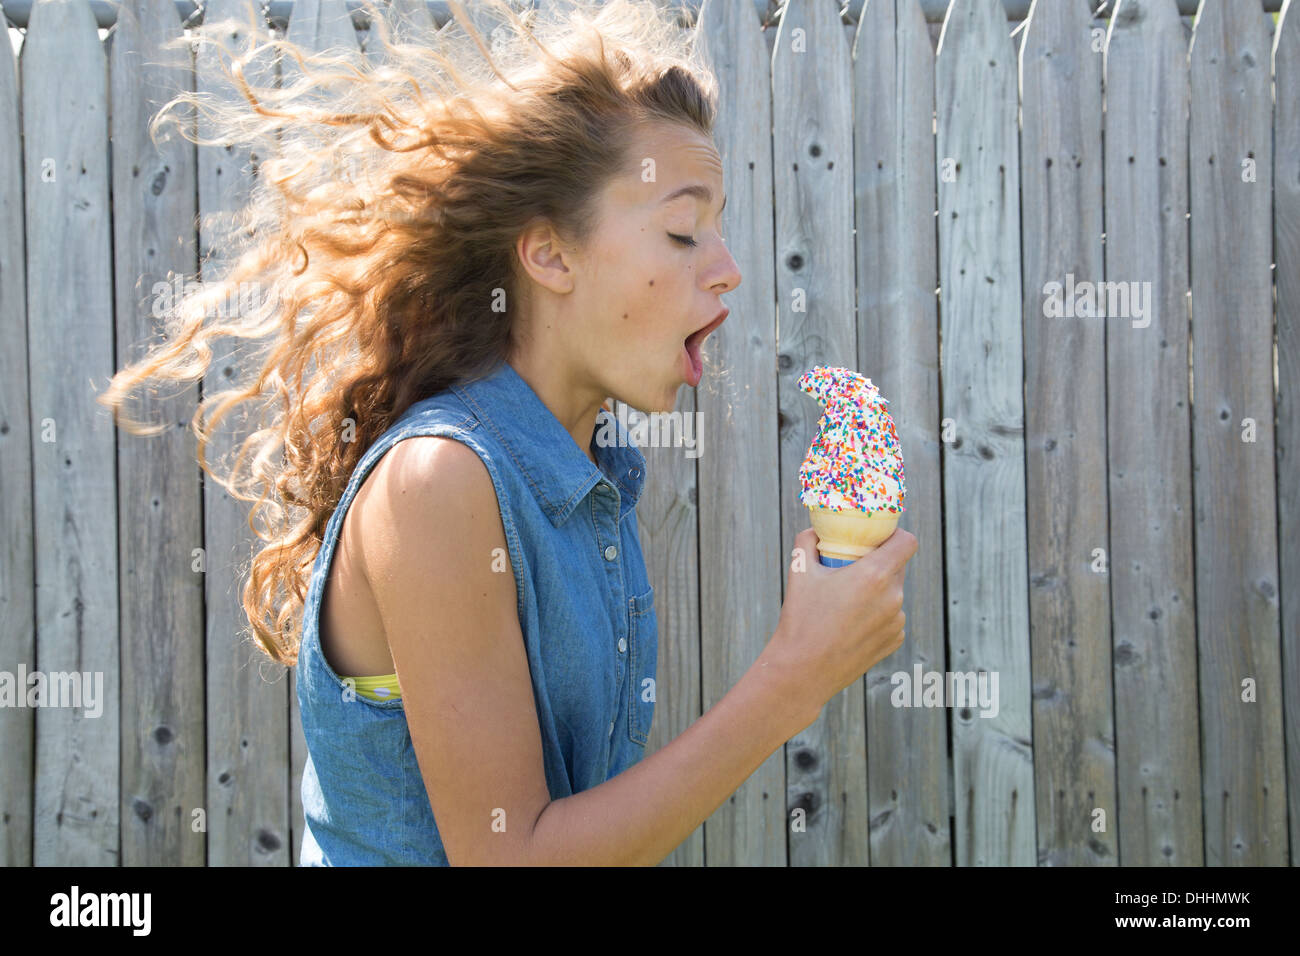 Teenage girl holding ice cream cone Banque D'Images